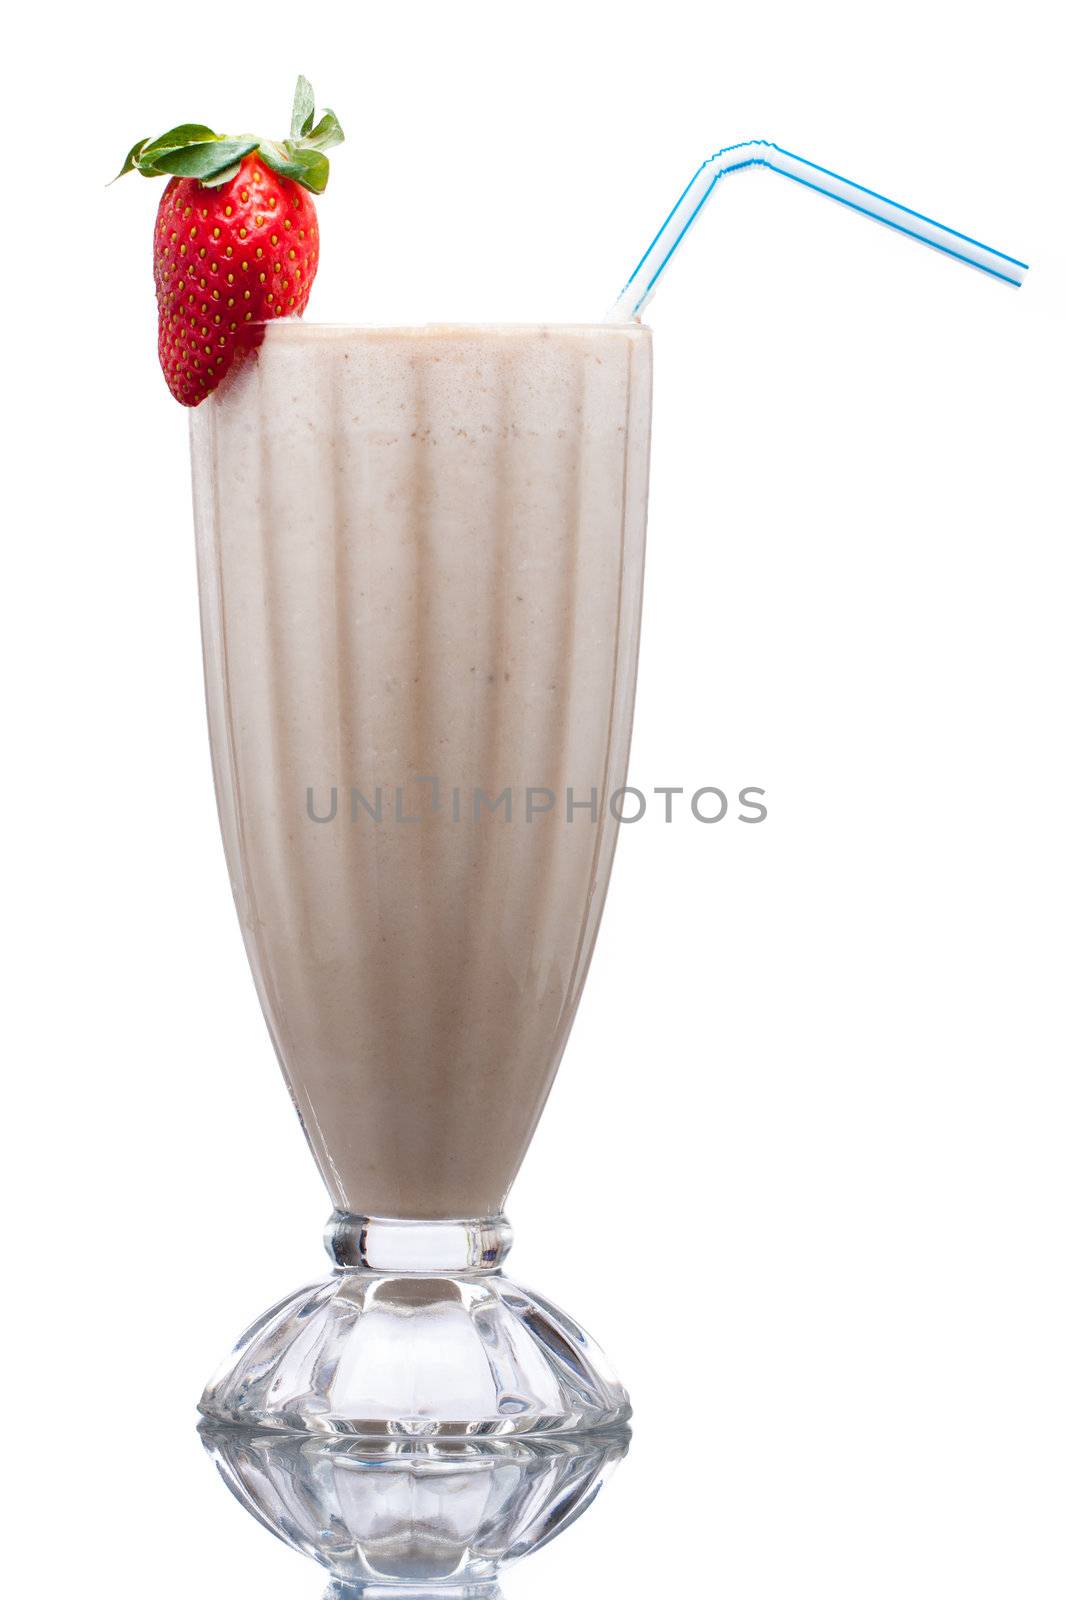 A delicious cold fruit smoothie or milk shake decorated with strawberry. Isolated on white.